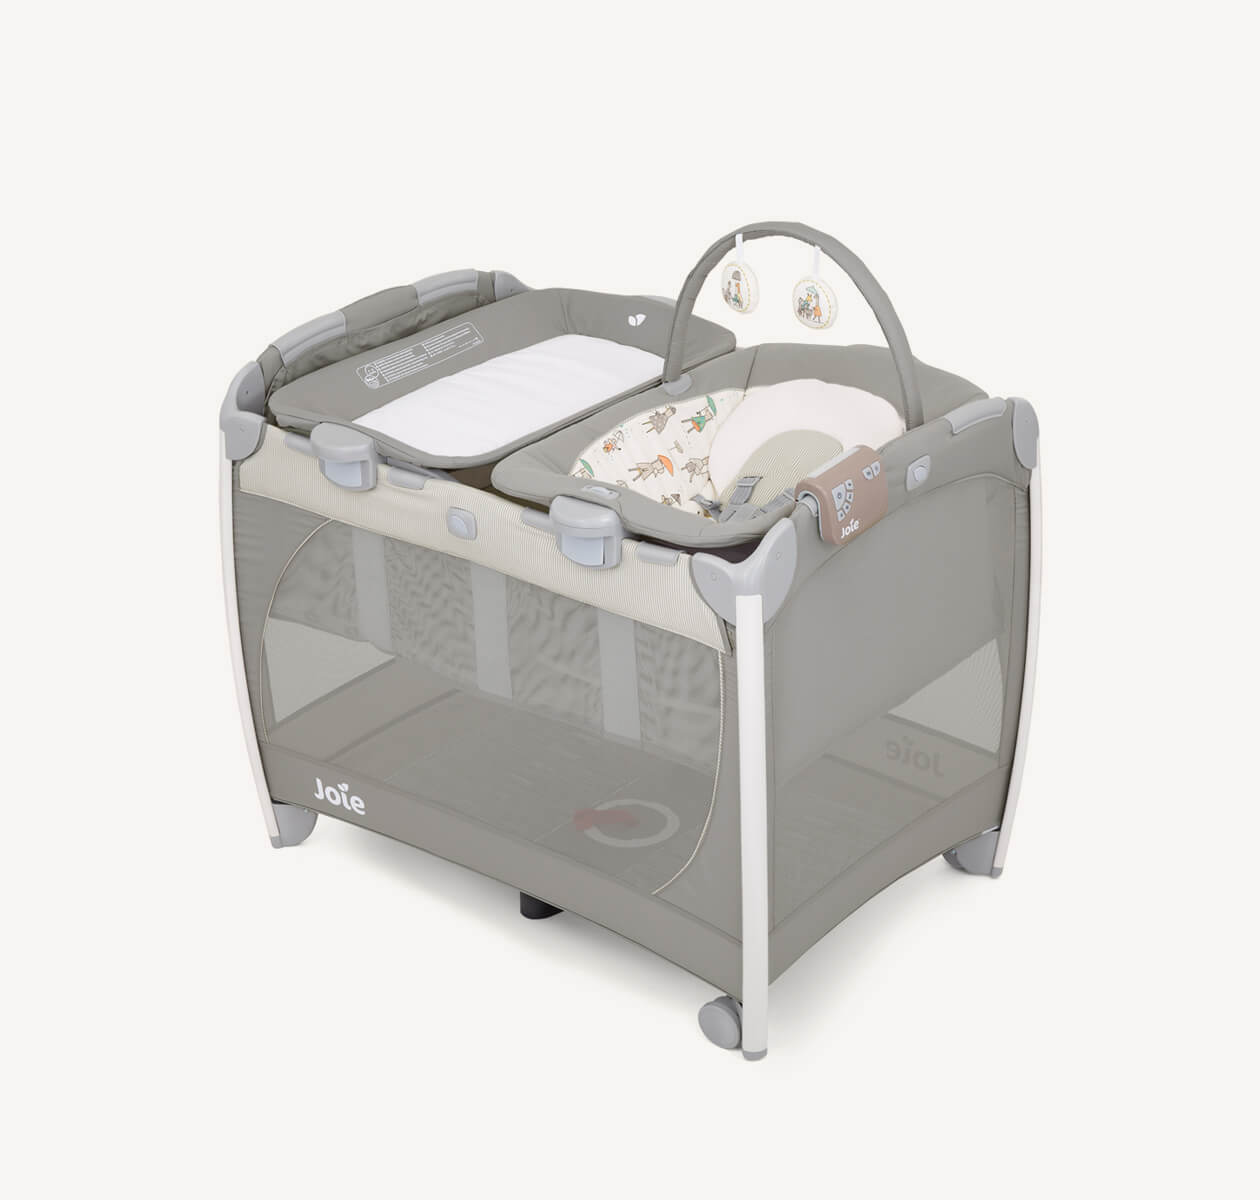 Joie excursion change and bounce travel cot with cartoon imagery at an angle.